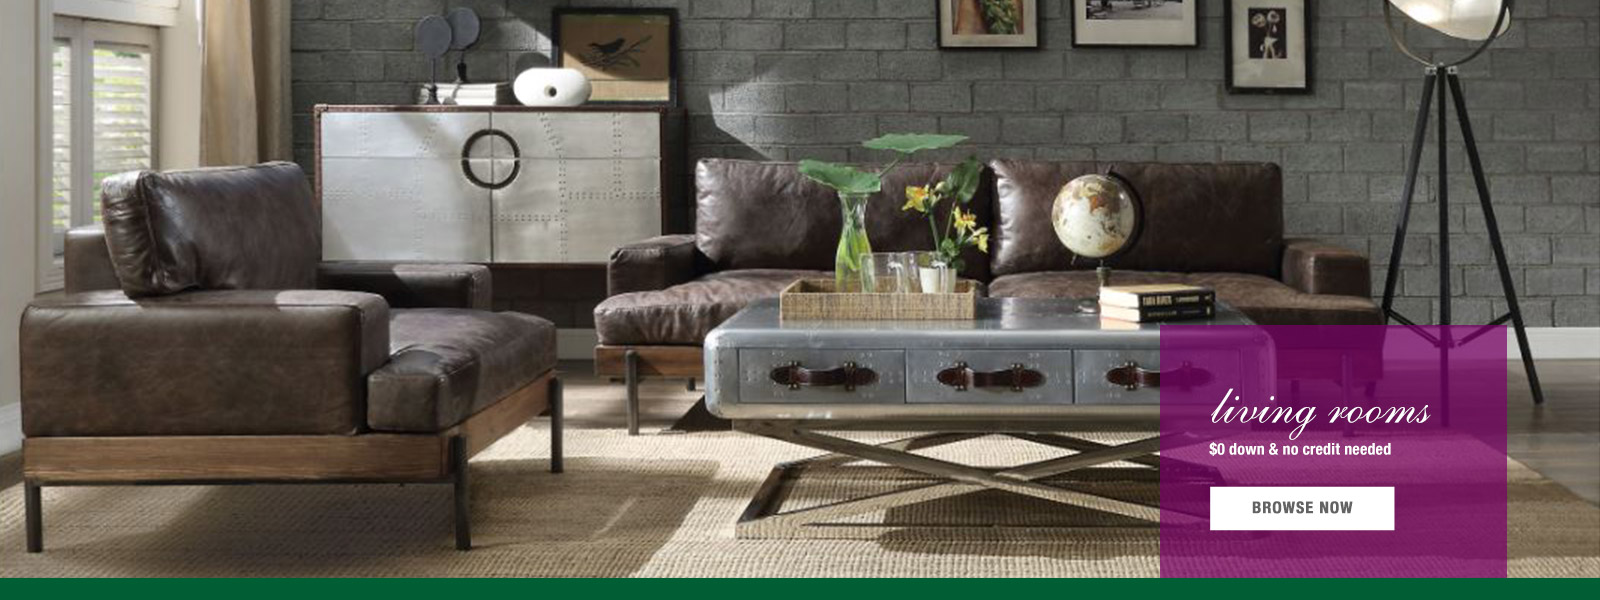 The Finest Selection Of Stylish Affordable Furniture In Pasco Wa